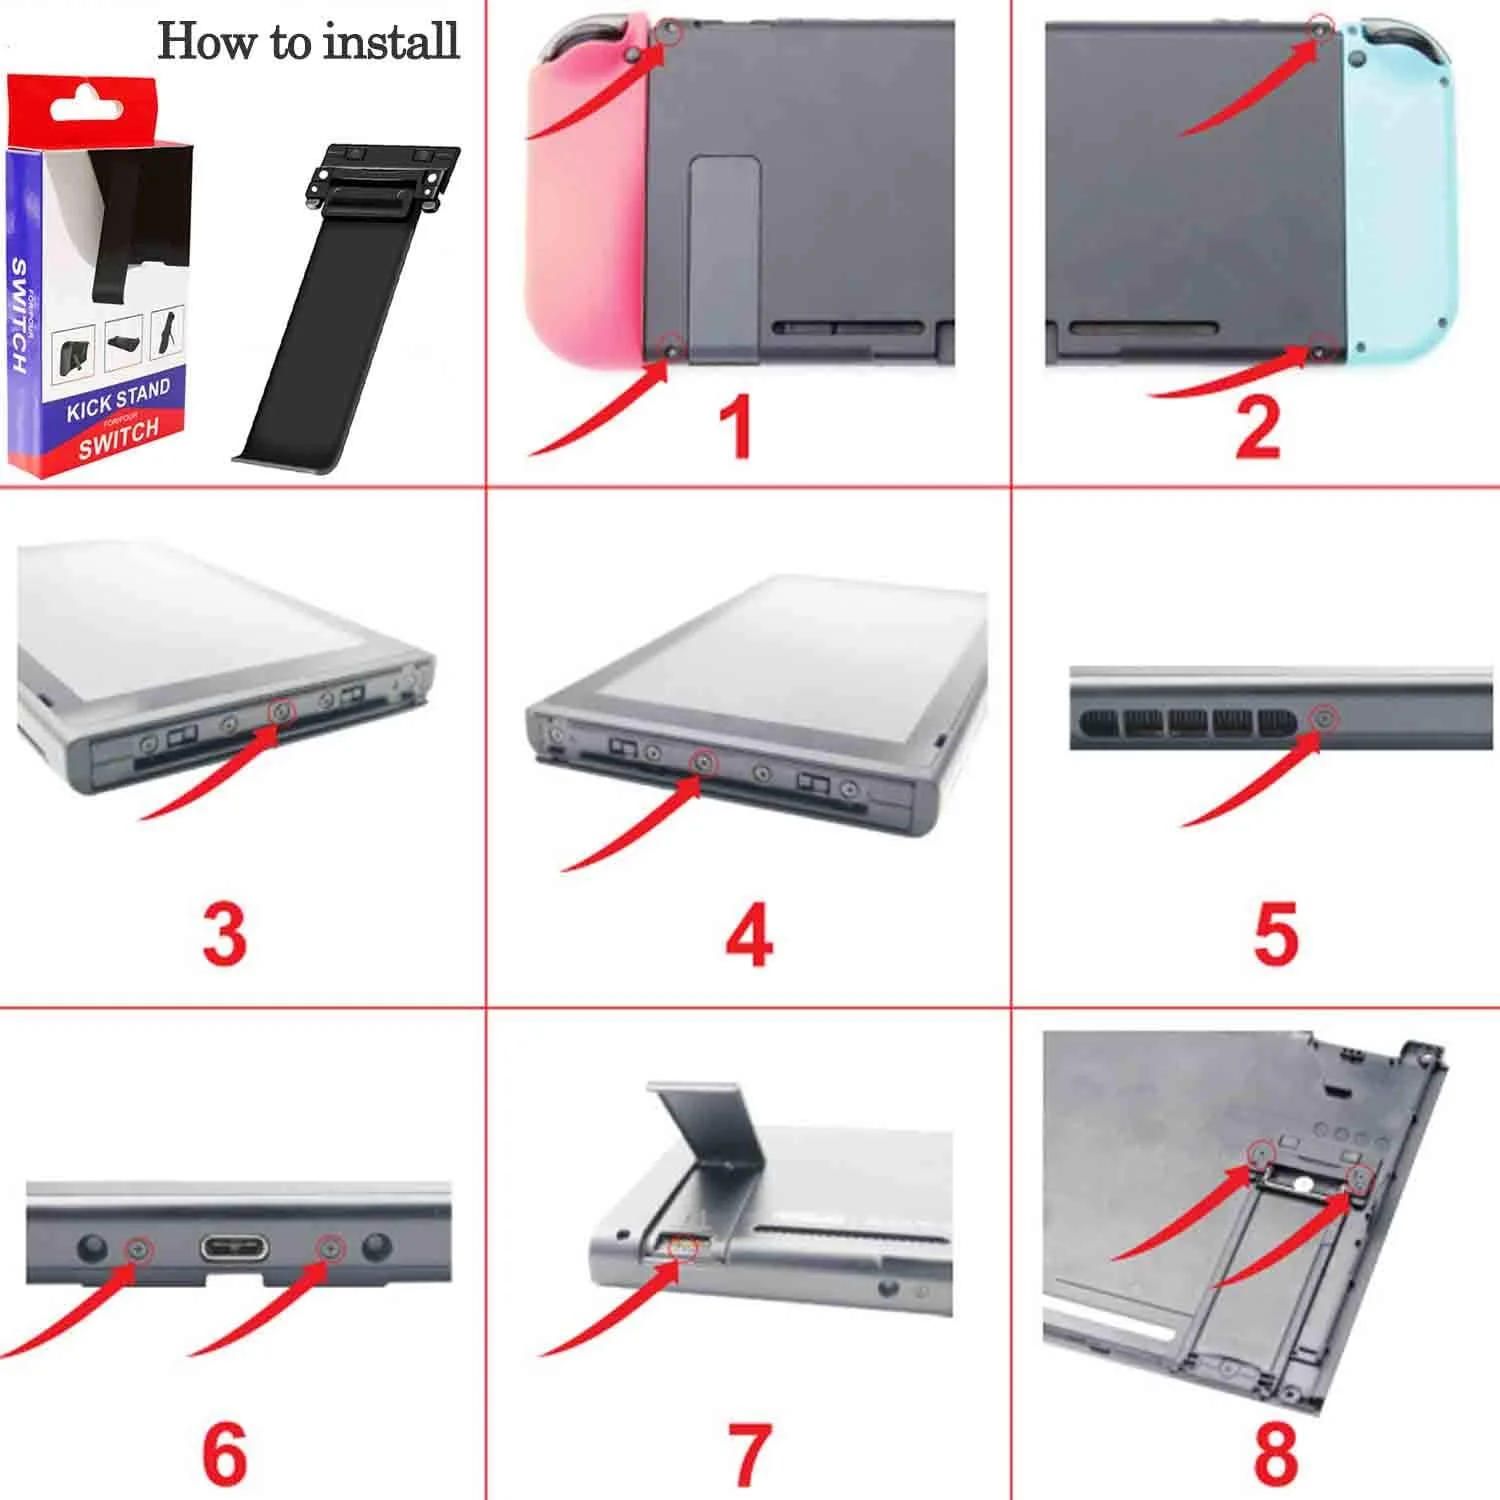 OLY Game Kickstand Replacement for Nintendo Switch - [Newest Version] Back Bracket Spare Parts Holder Replacement Kick Stand images - 6